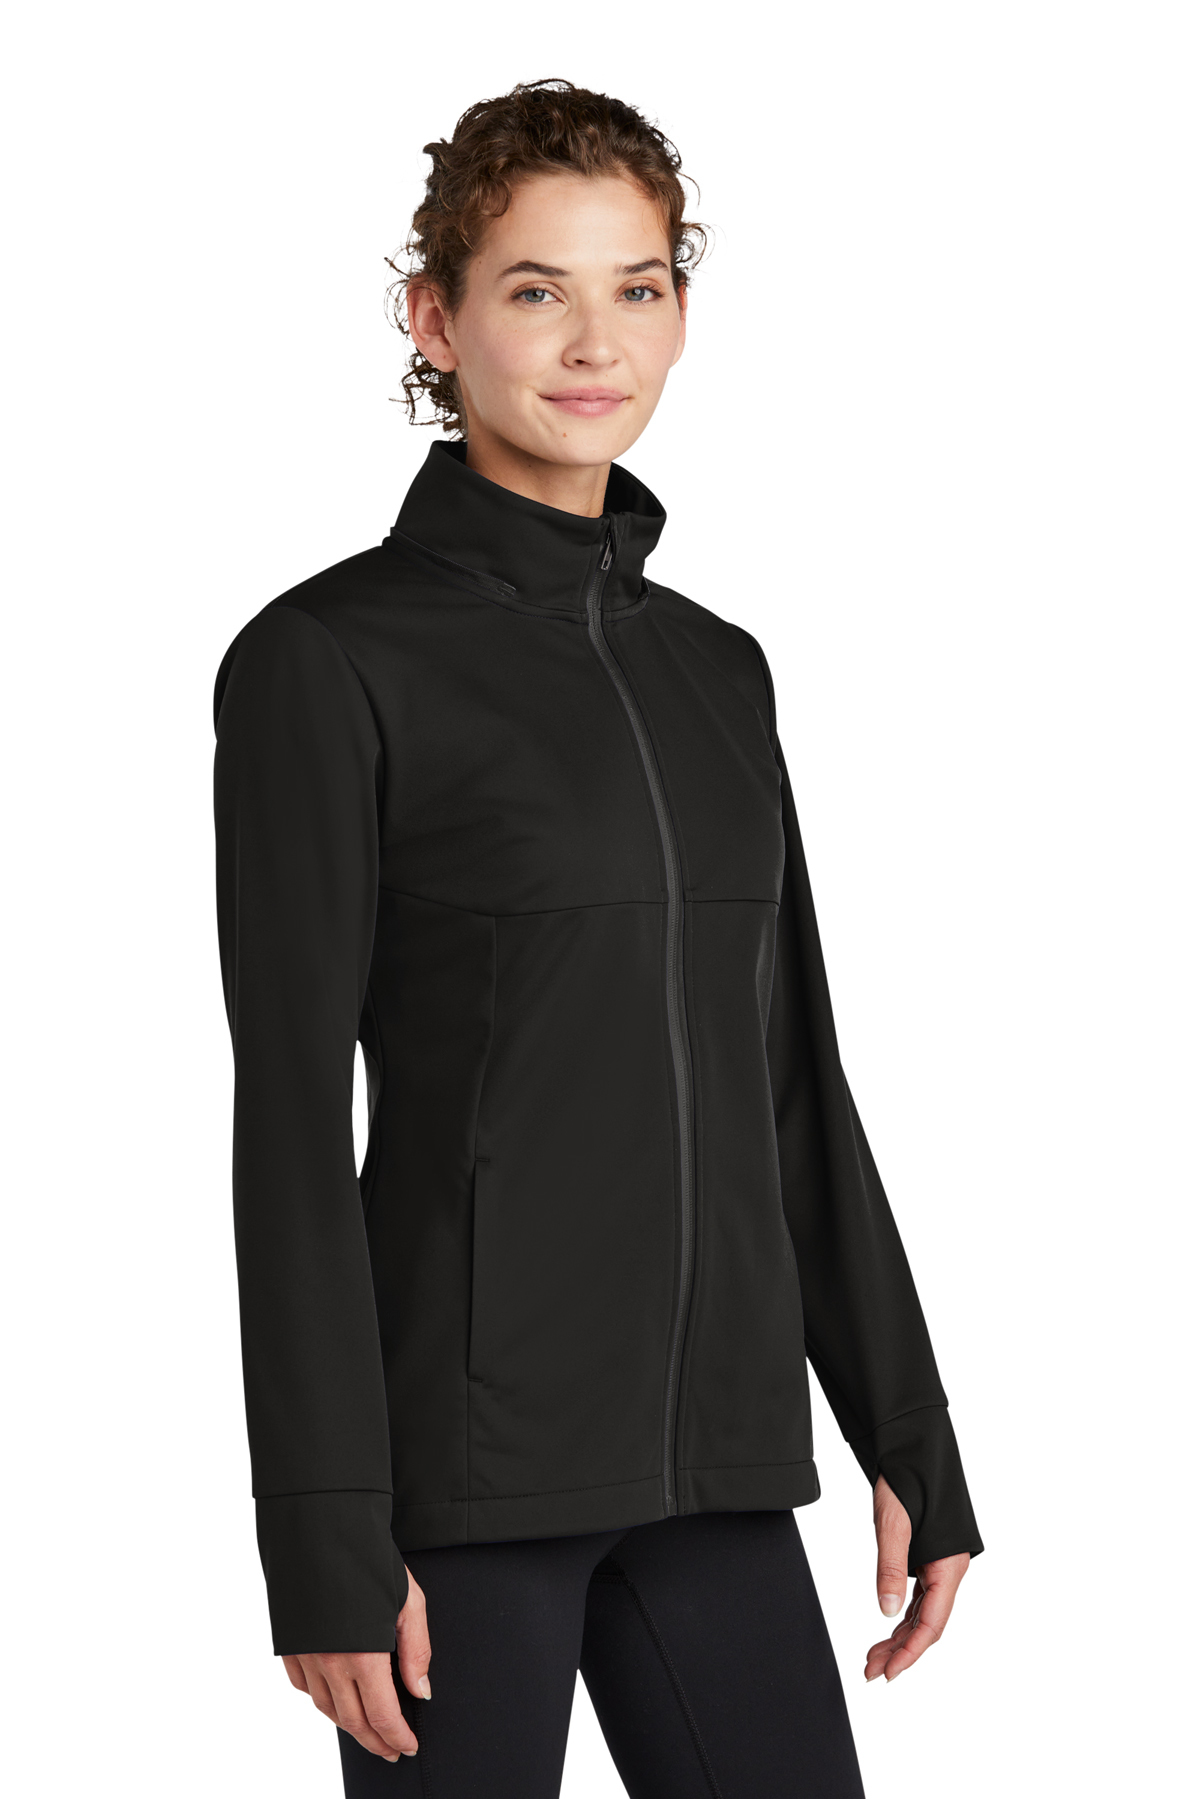 Sport-Tek Ladies Hooded Soft Shell Jacket | Product | Company Casuals